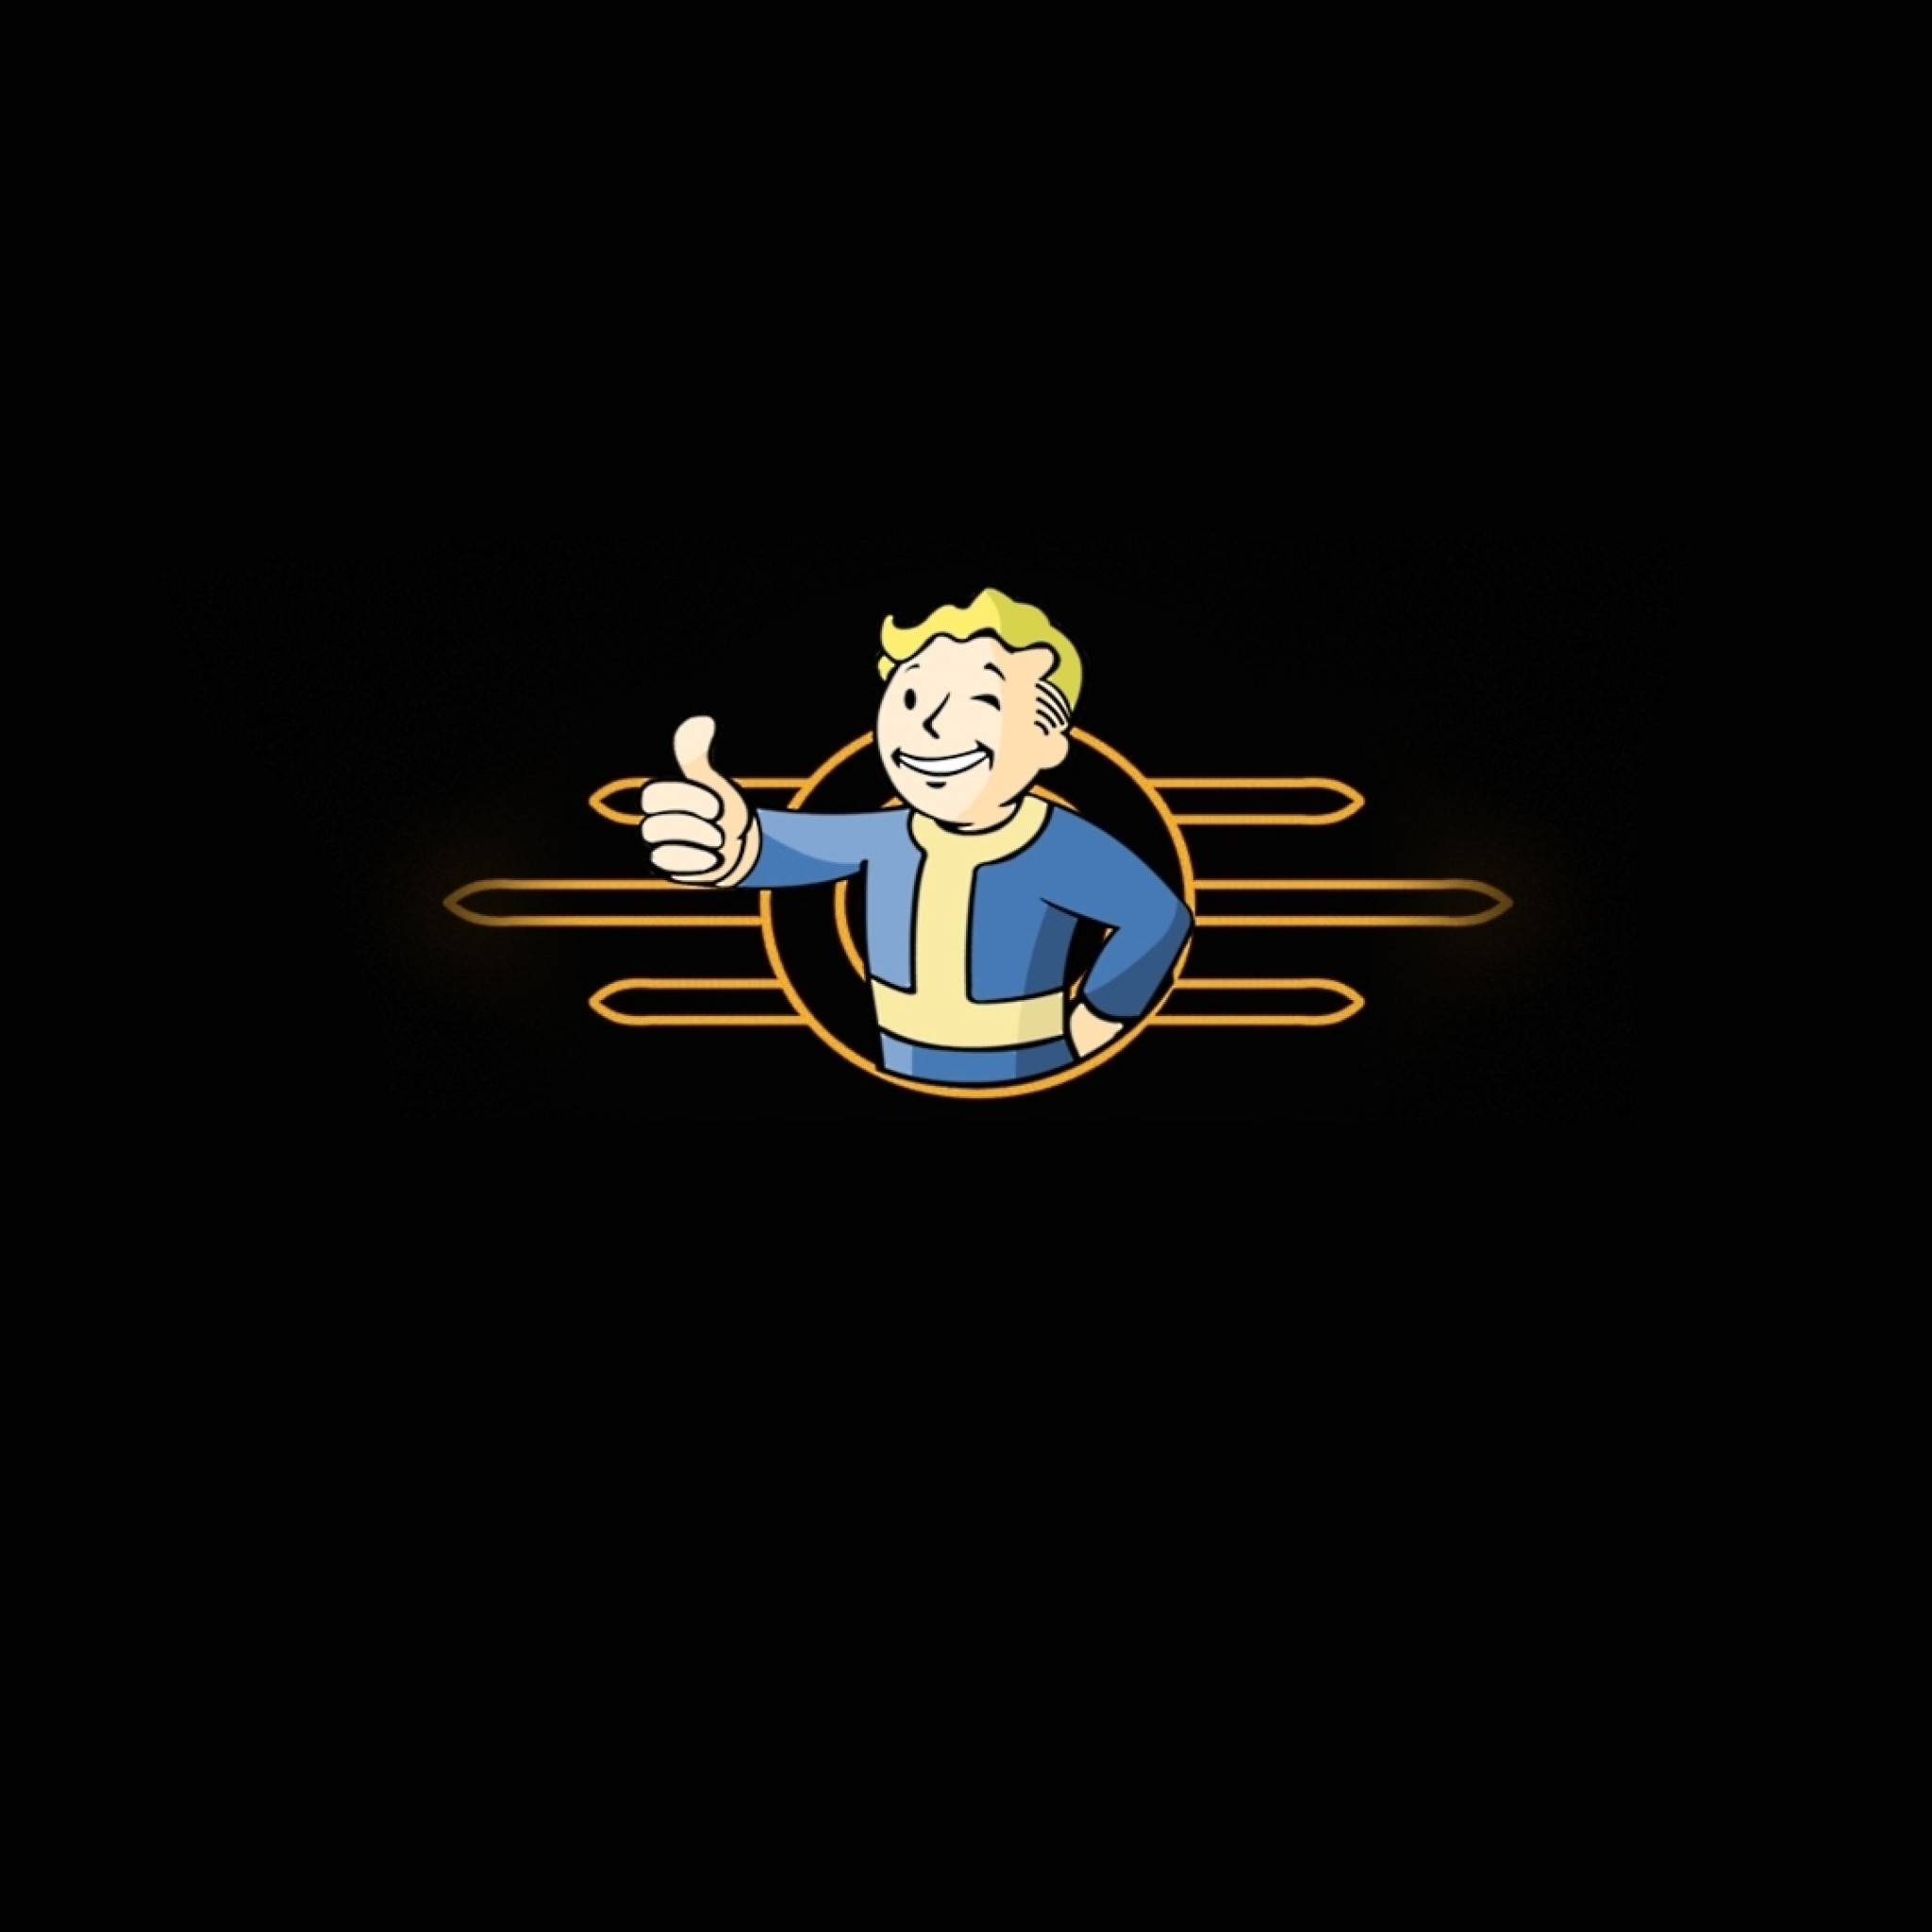 2048x2048 vault-boy-wallpapers-and-backgrounds-games-picture-vault-